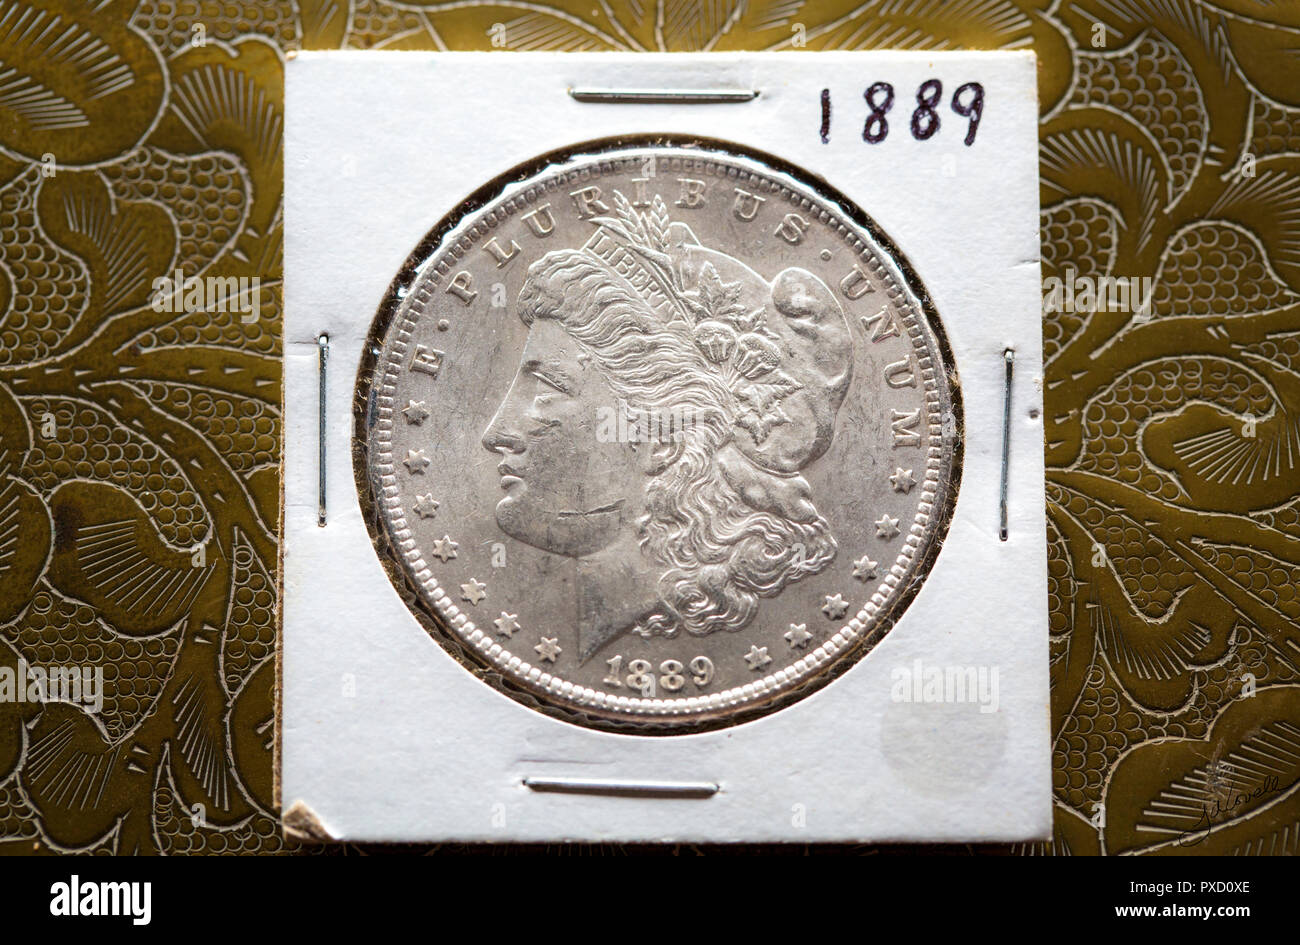 Mint State Silvery Morgan Dollar in its 2 x 2 Cardboard Holder against the brass design of a box top. Stock Photo